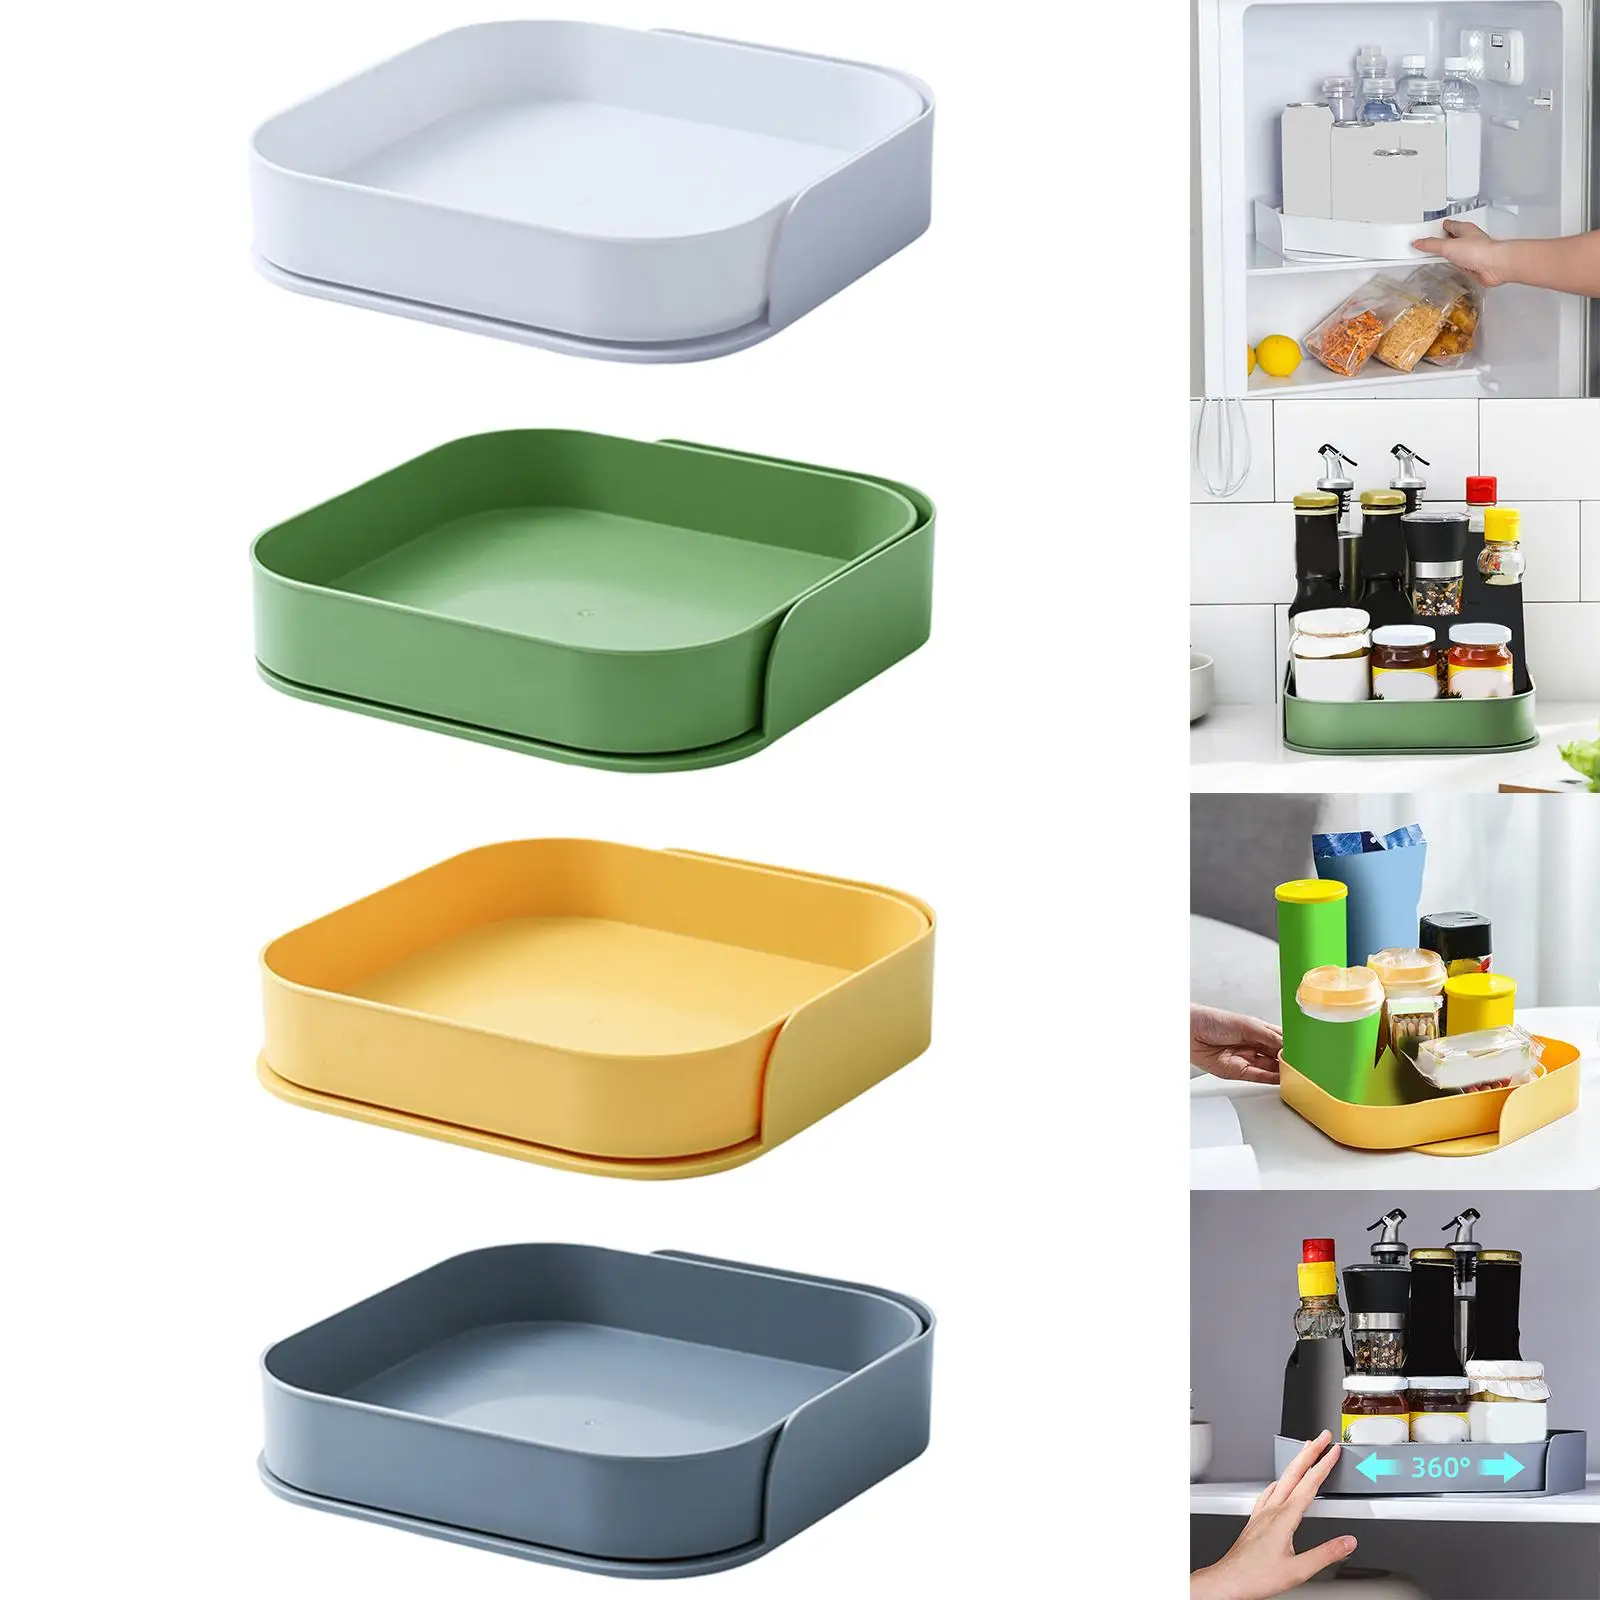 Spice Storage Rack Makeup Tray Countertop Display Tray Multiuse for Toilet